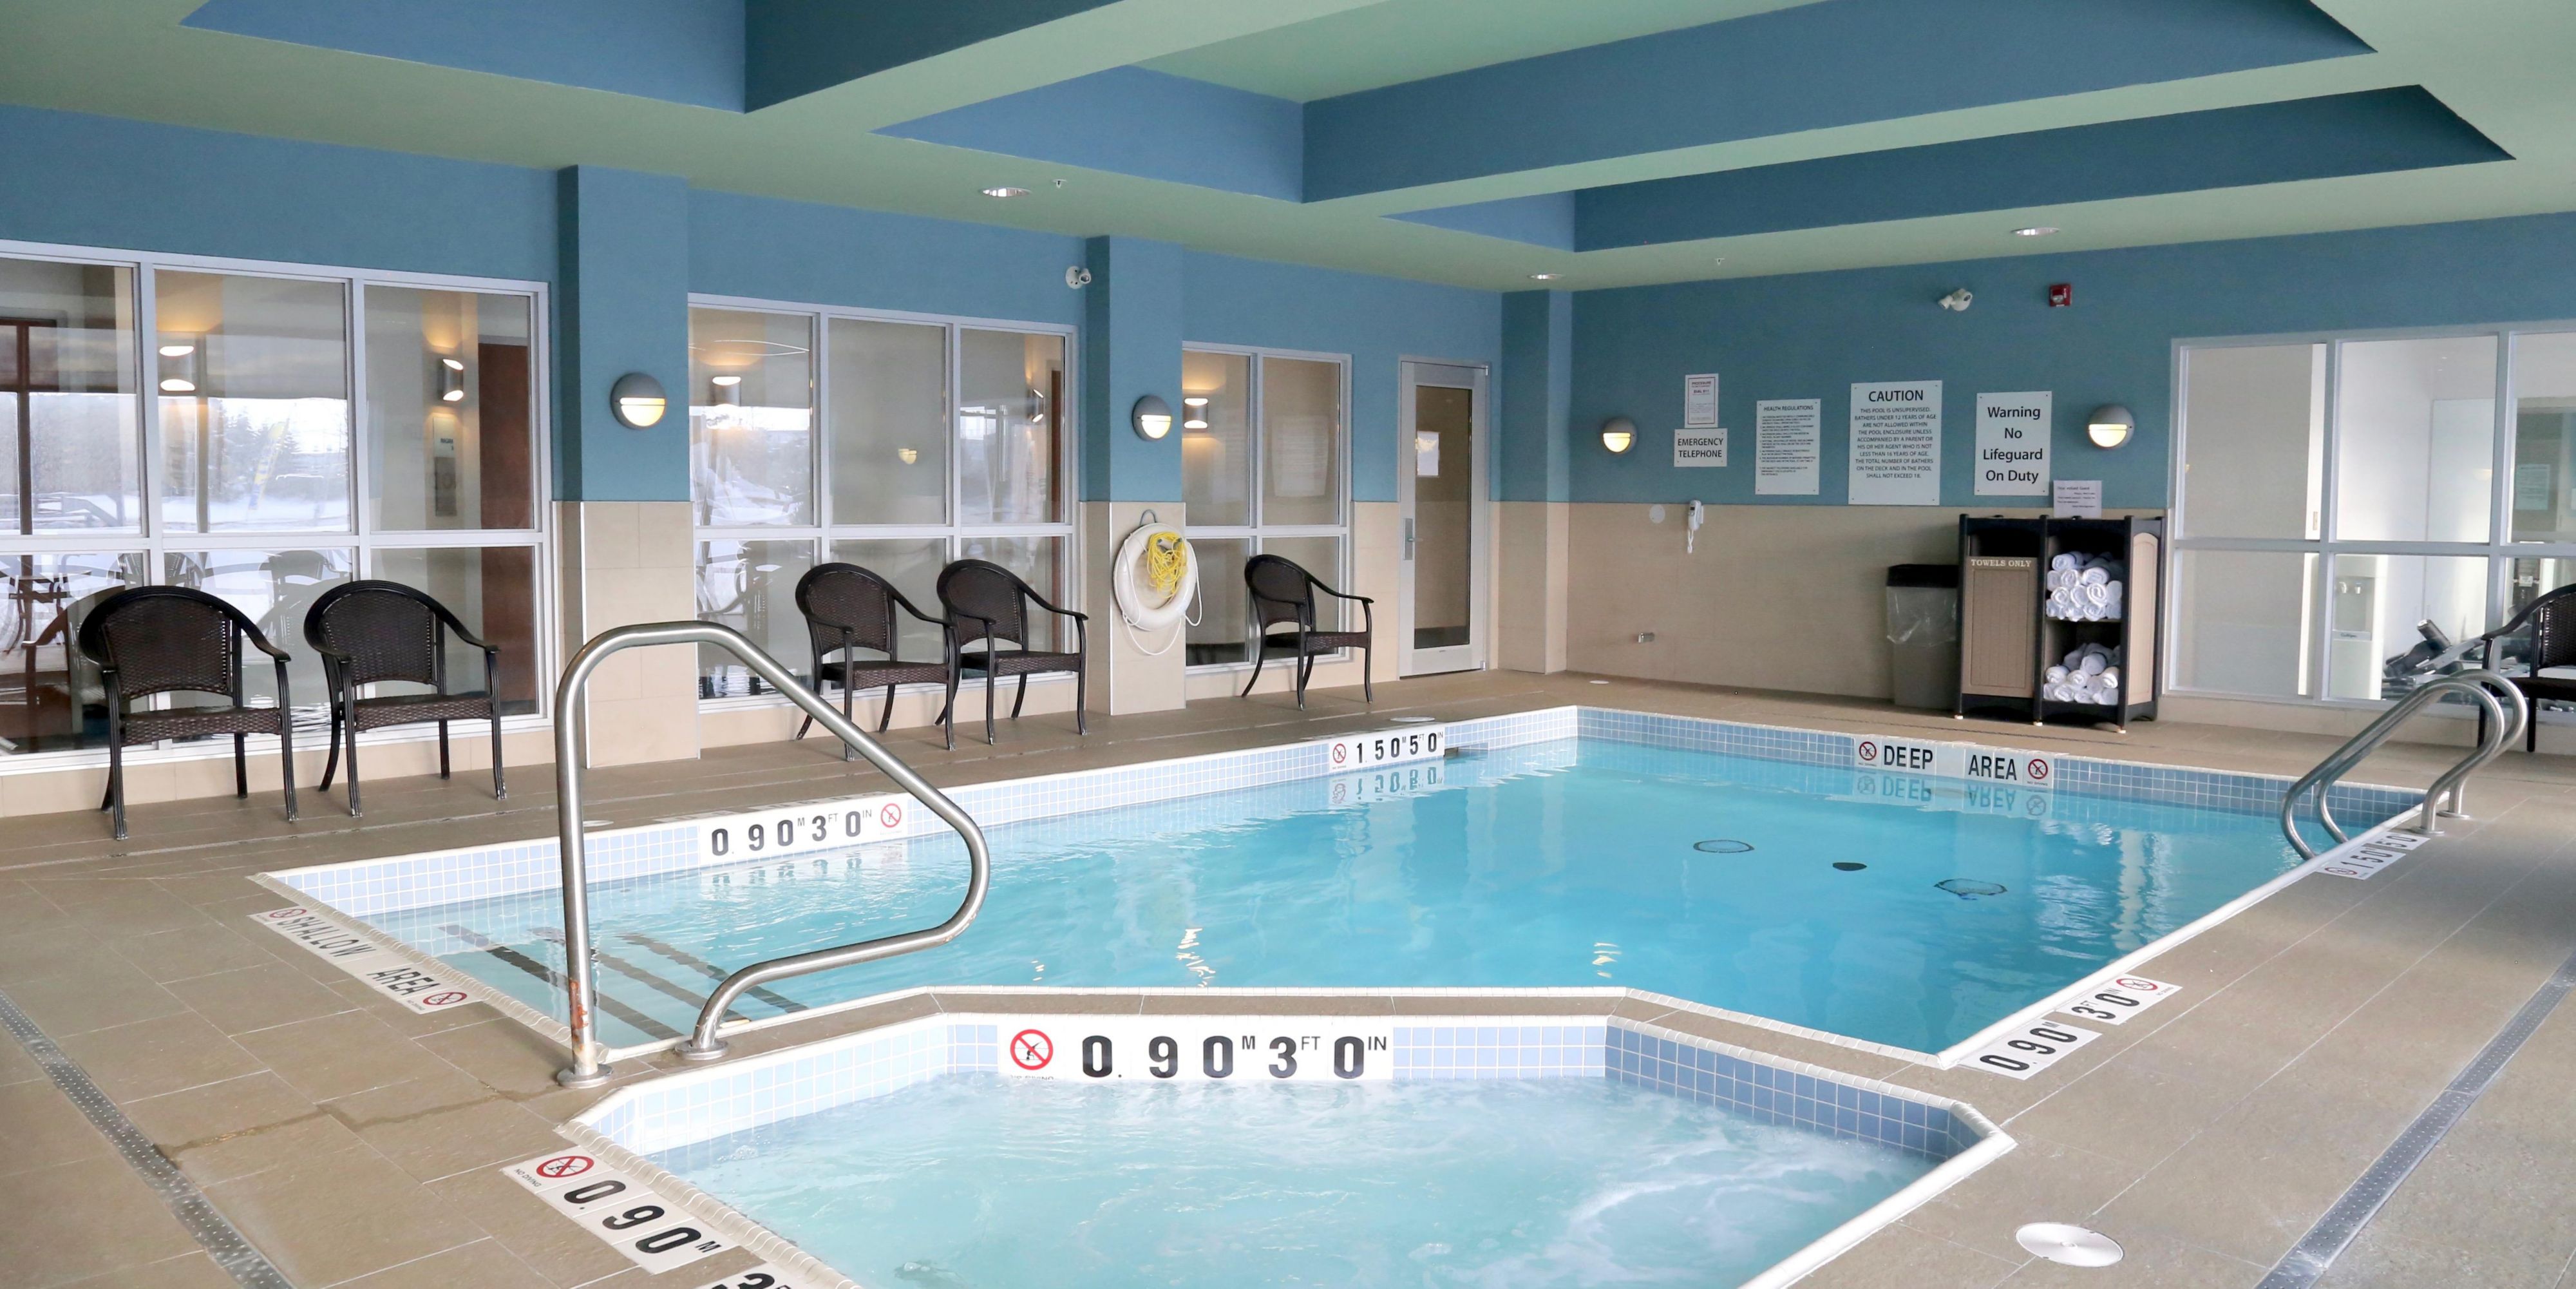 We've got fun for the whole family and the perfect way to spend a weekend! Take a dip in our heated indoor swimming pool. What better way to tire the kids out before you have a great nights' sleep in your guest room.